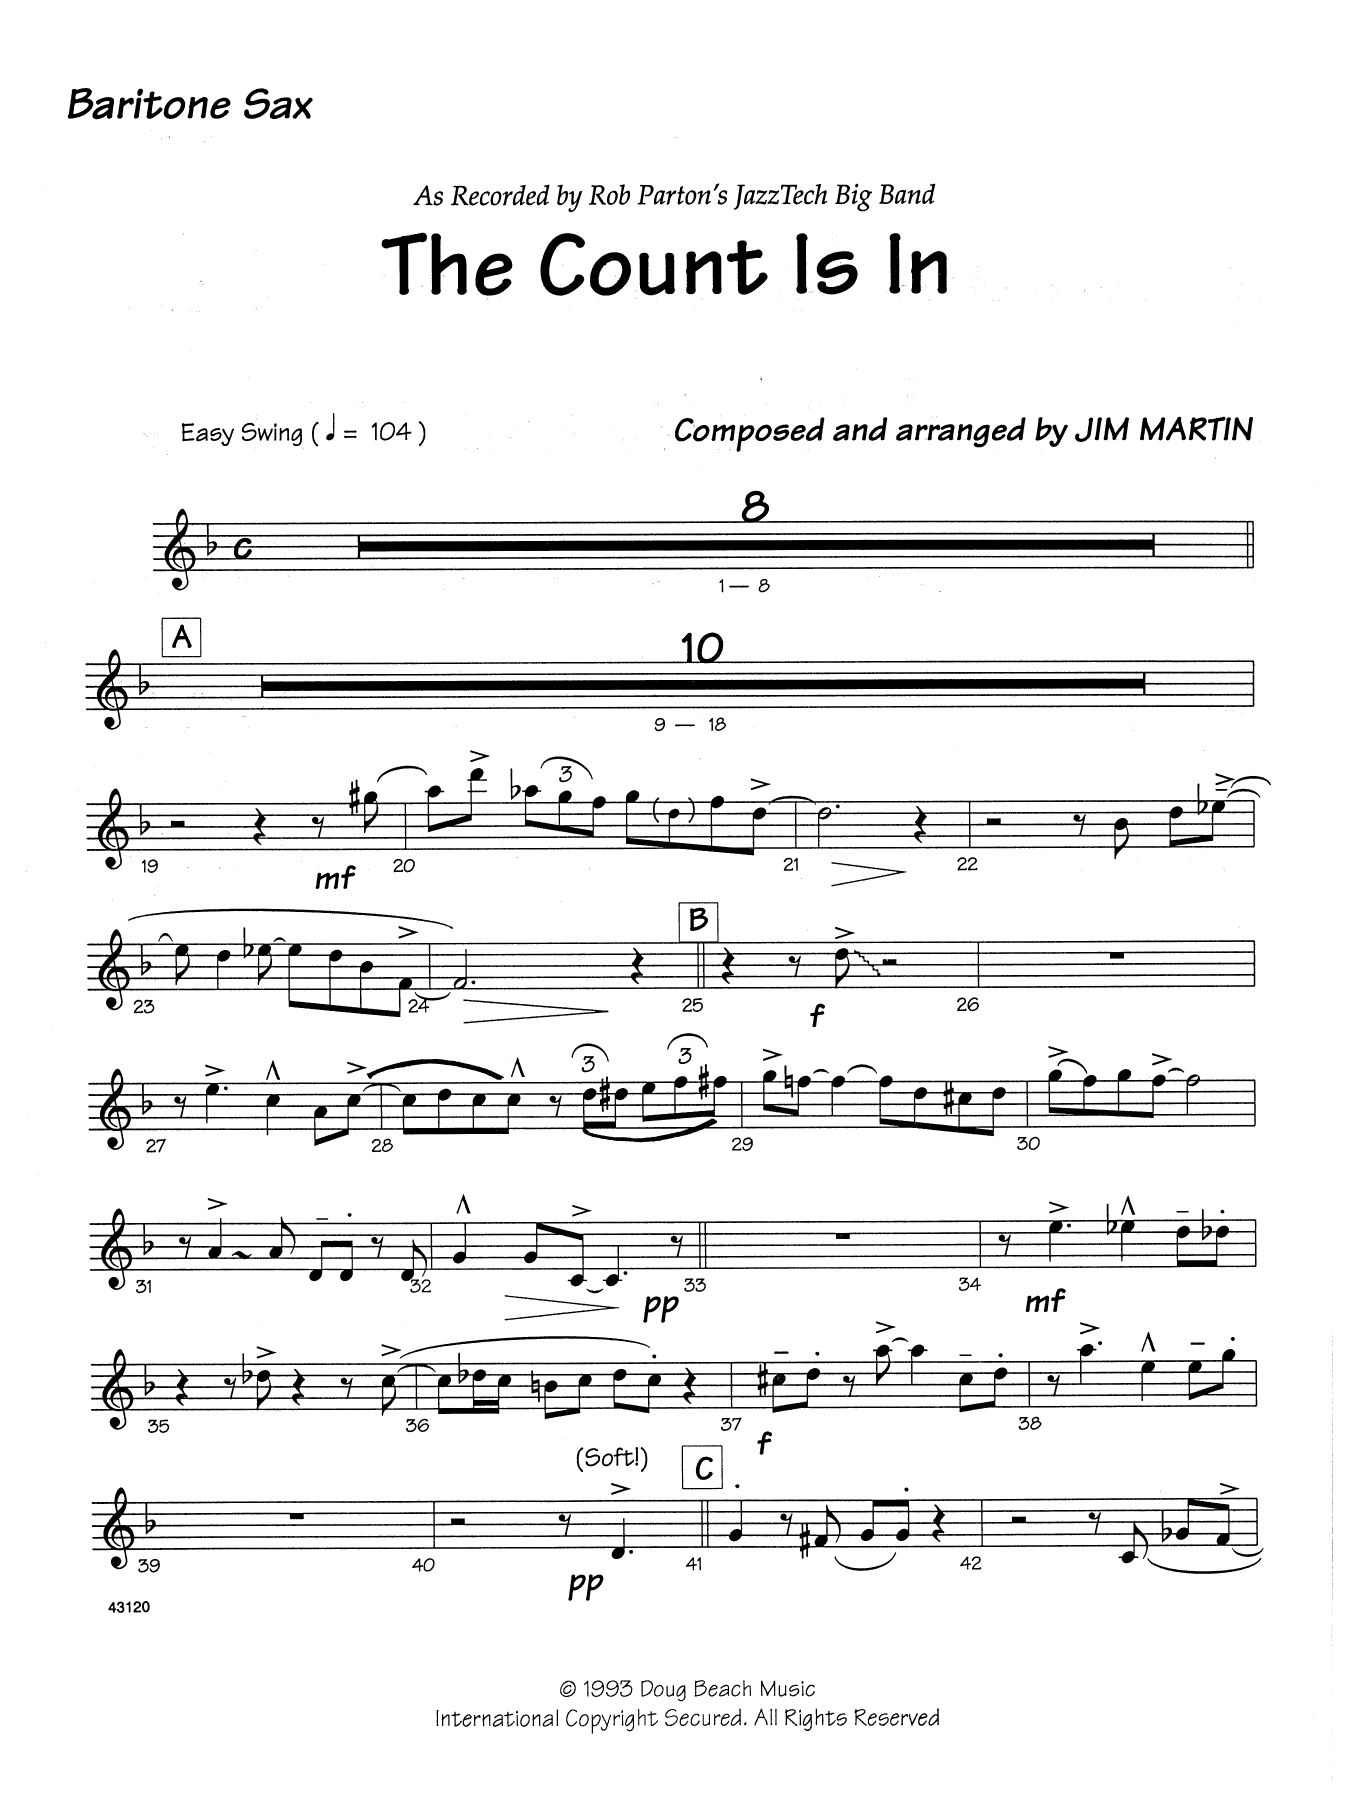 Download Martin The Count Is In - Eb Baritone Saxophone Sheet Music